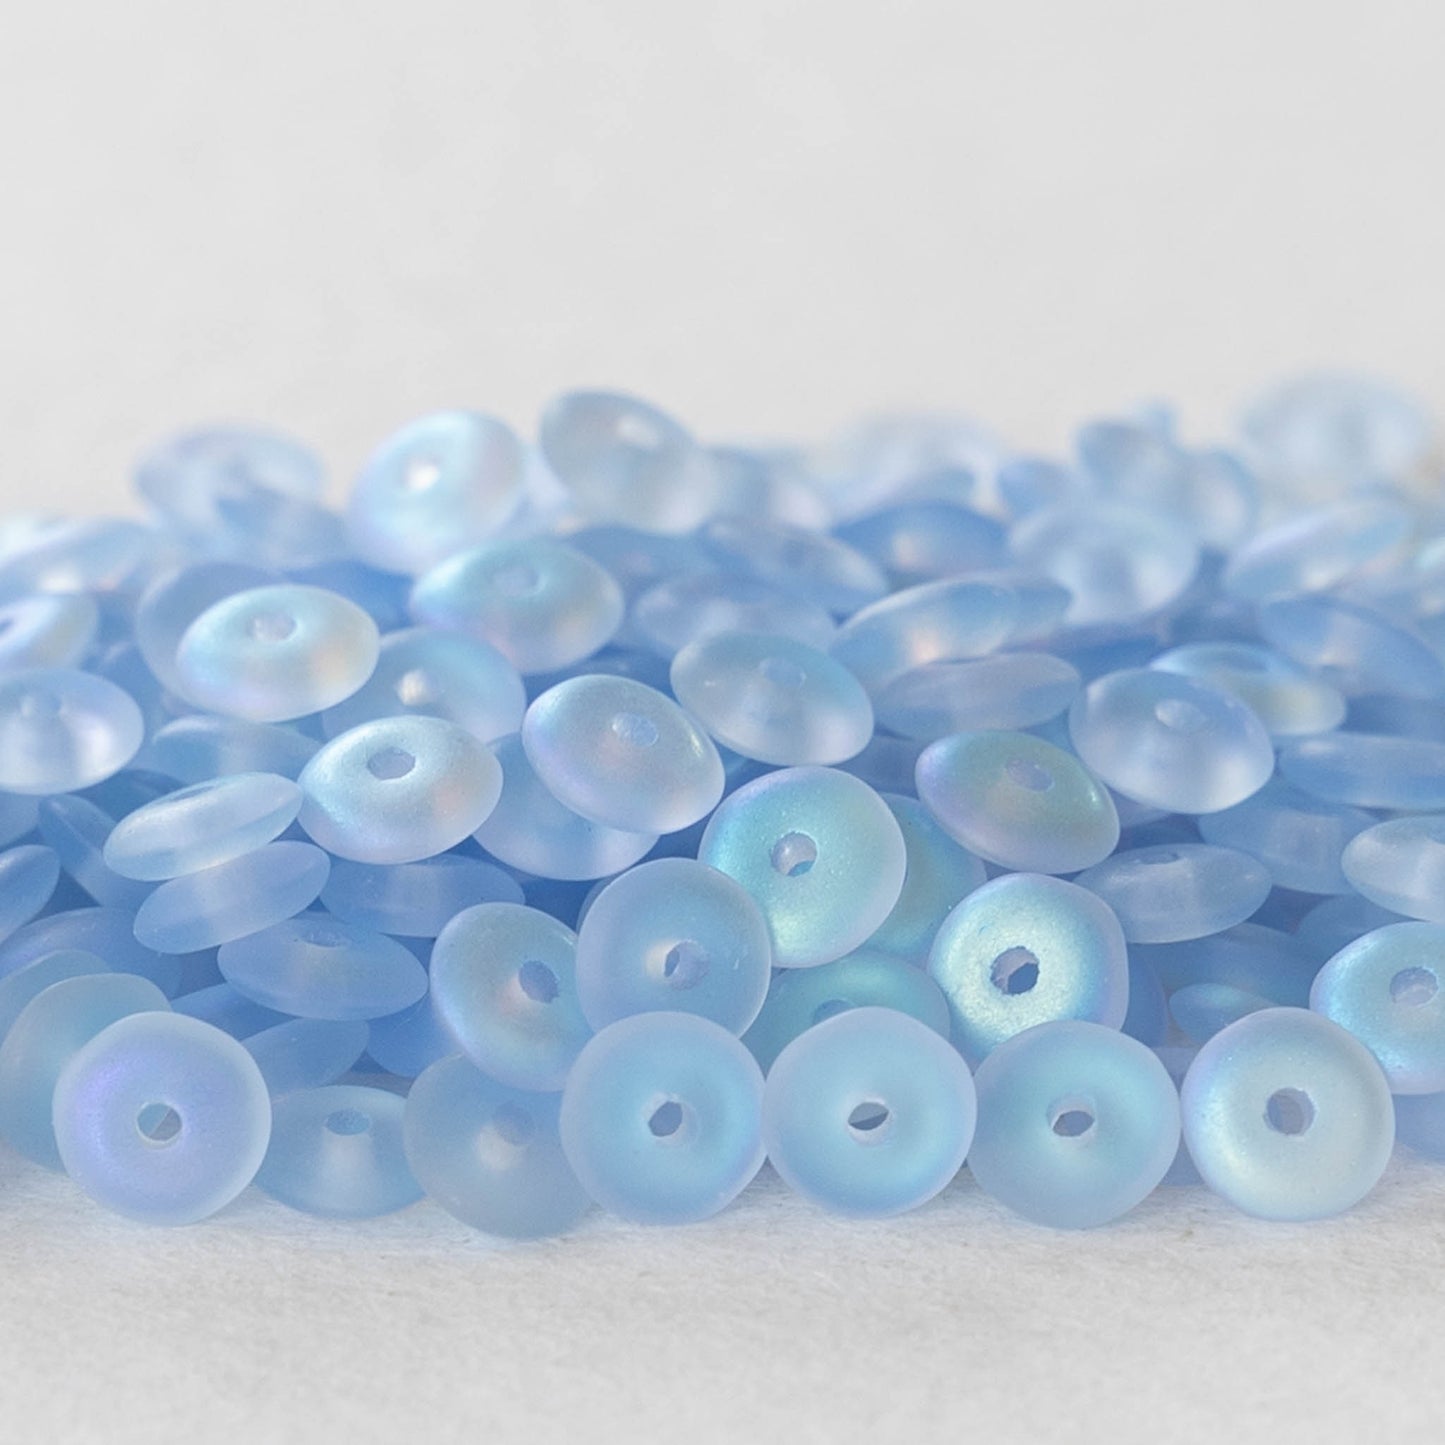 5mm Smooth Rondelle Beads - Frosted Light Blue AB - 100 beads